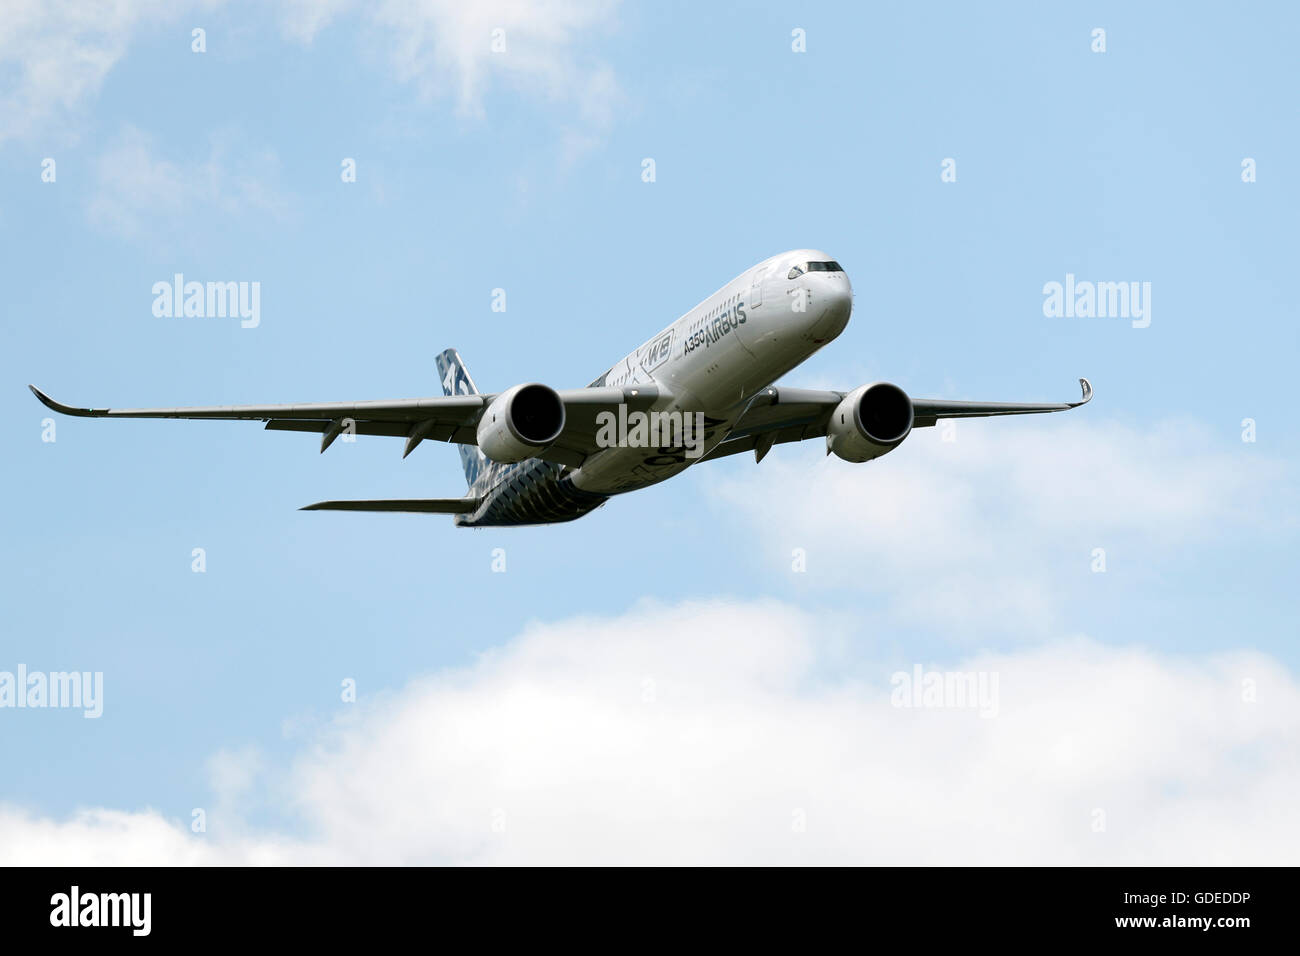 An Airbus A350 flies during the Farnborough International Airshow in July 2016 Stock Photo